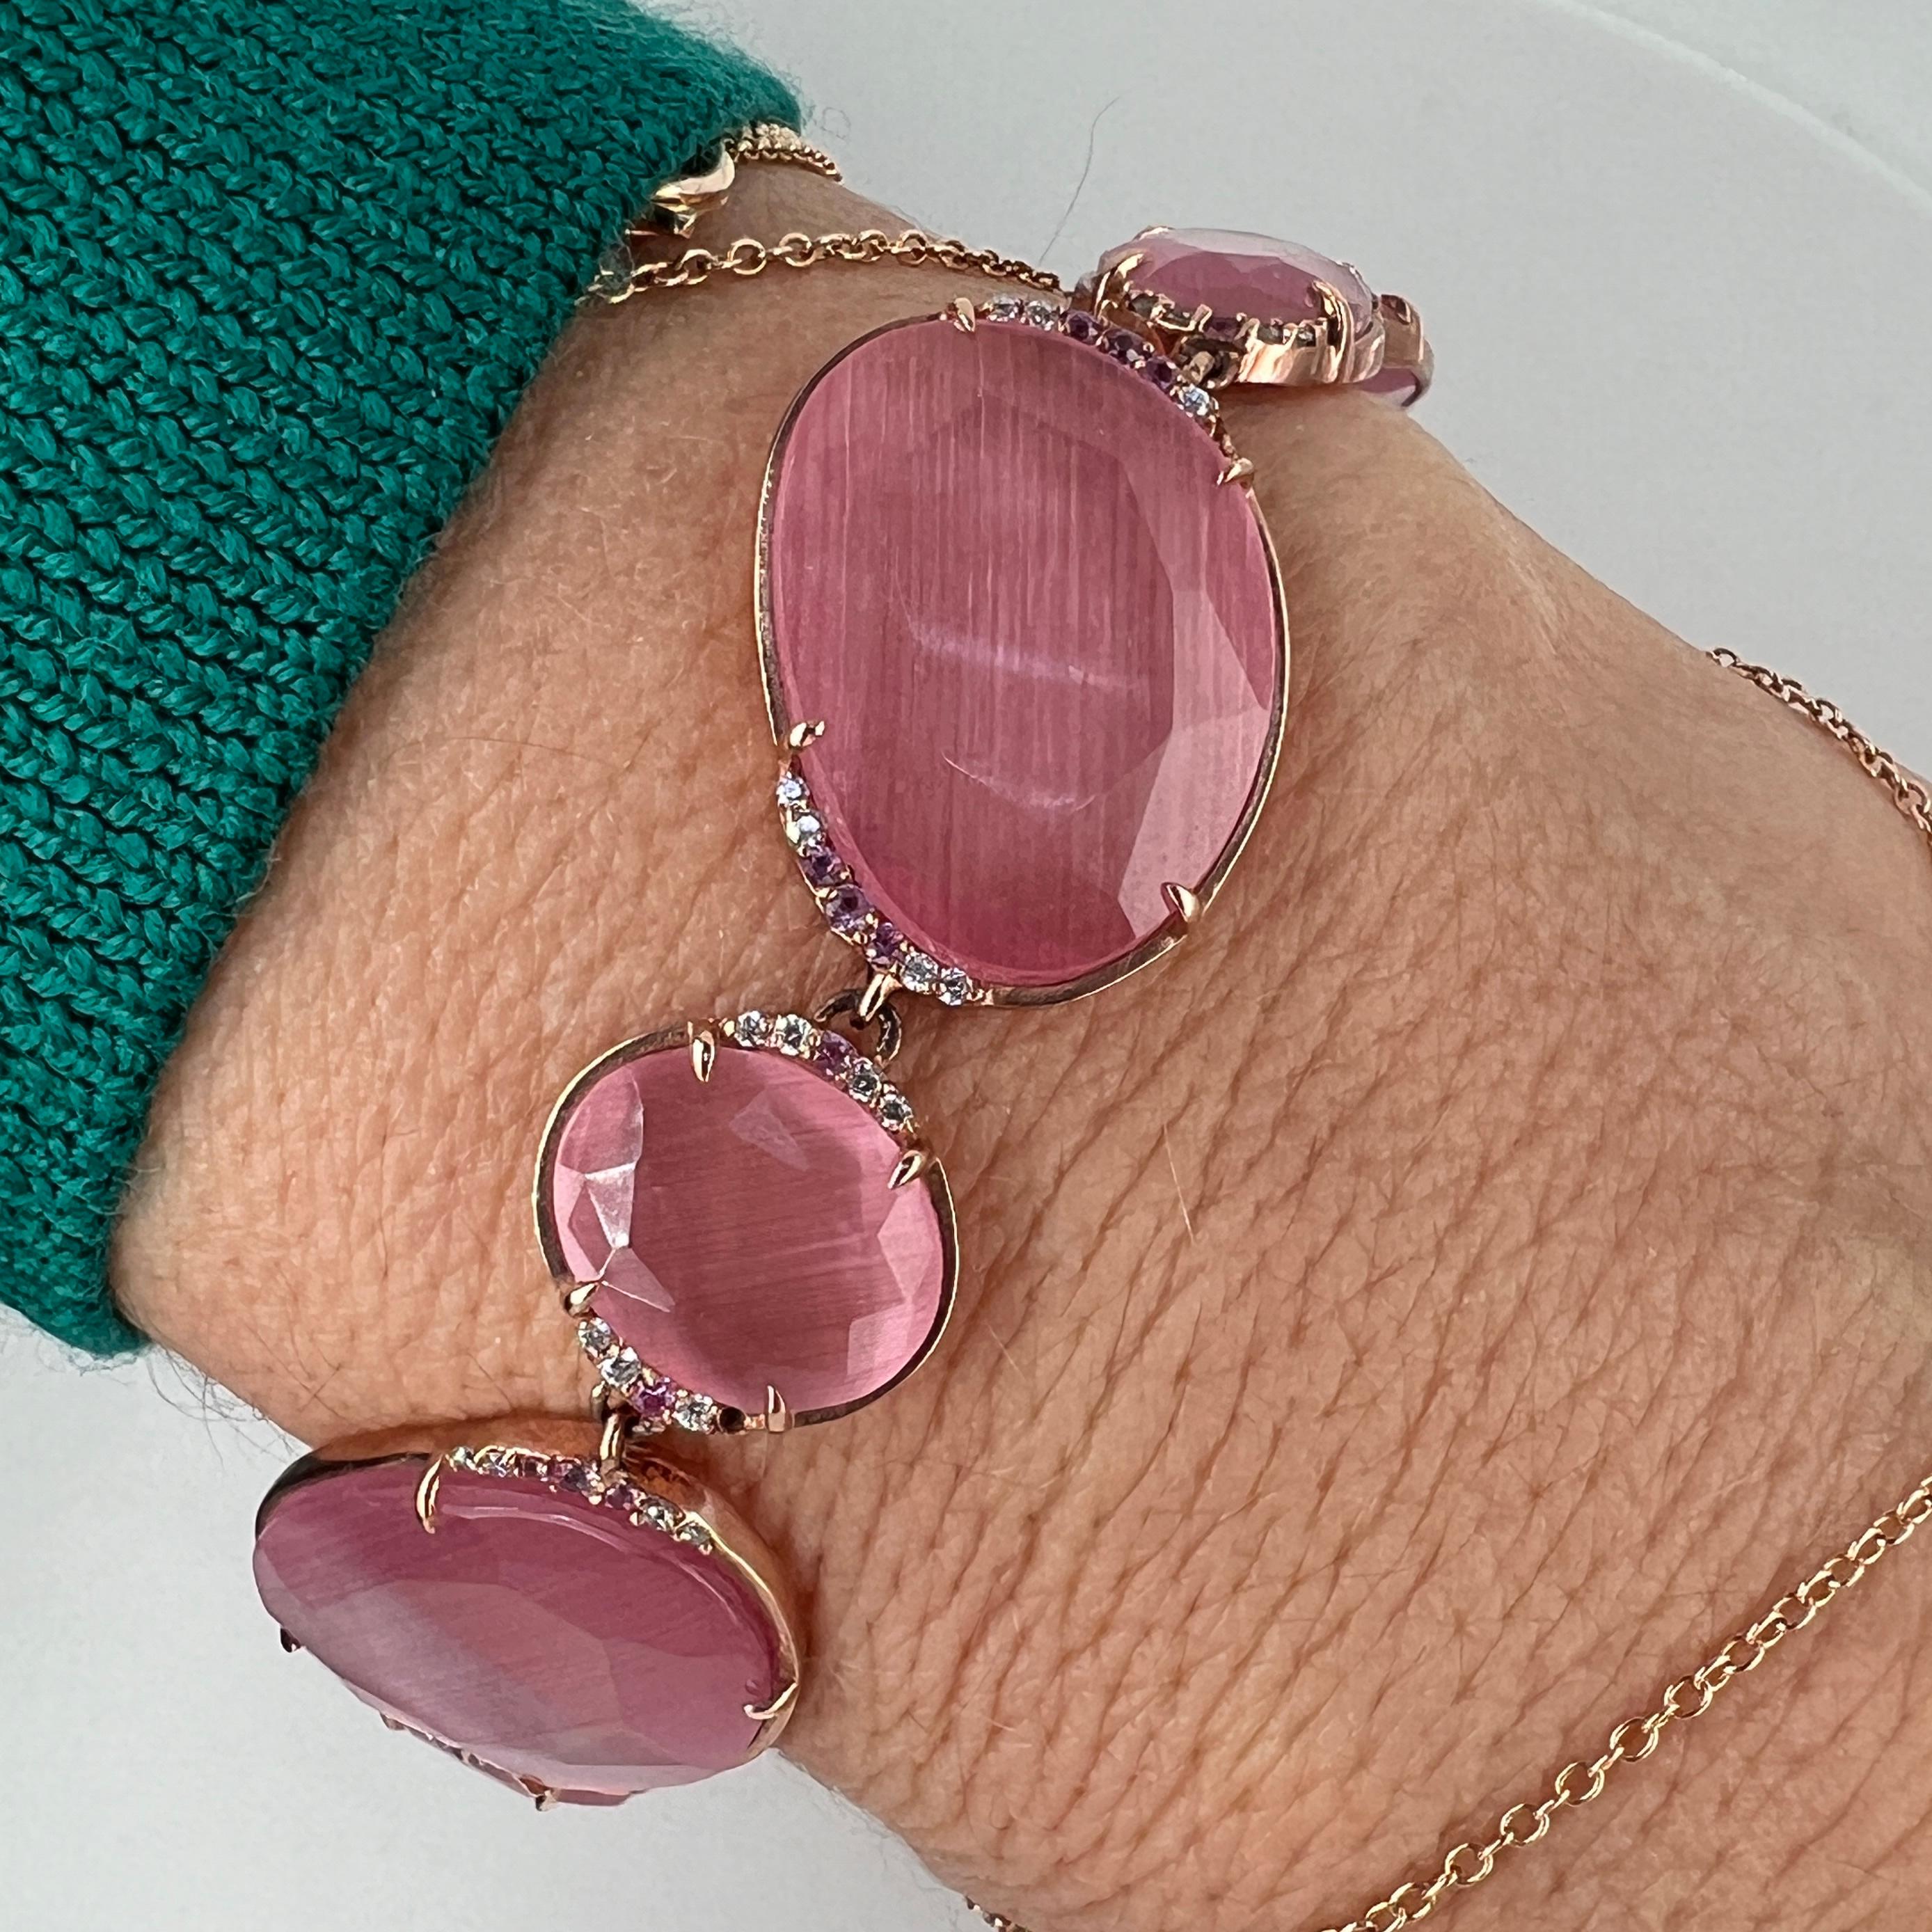 The Optic Chic Collection bracelet is a unique piece crafted using only the finest materials. It features a 9kt gold body with white natural diamonds, doublets of Optic Fiber & Rock crystal & pink sapphires . The pink optic fiber and rock crystal